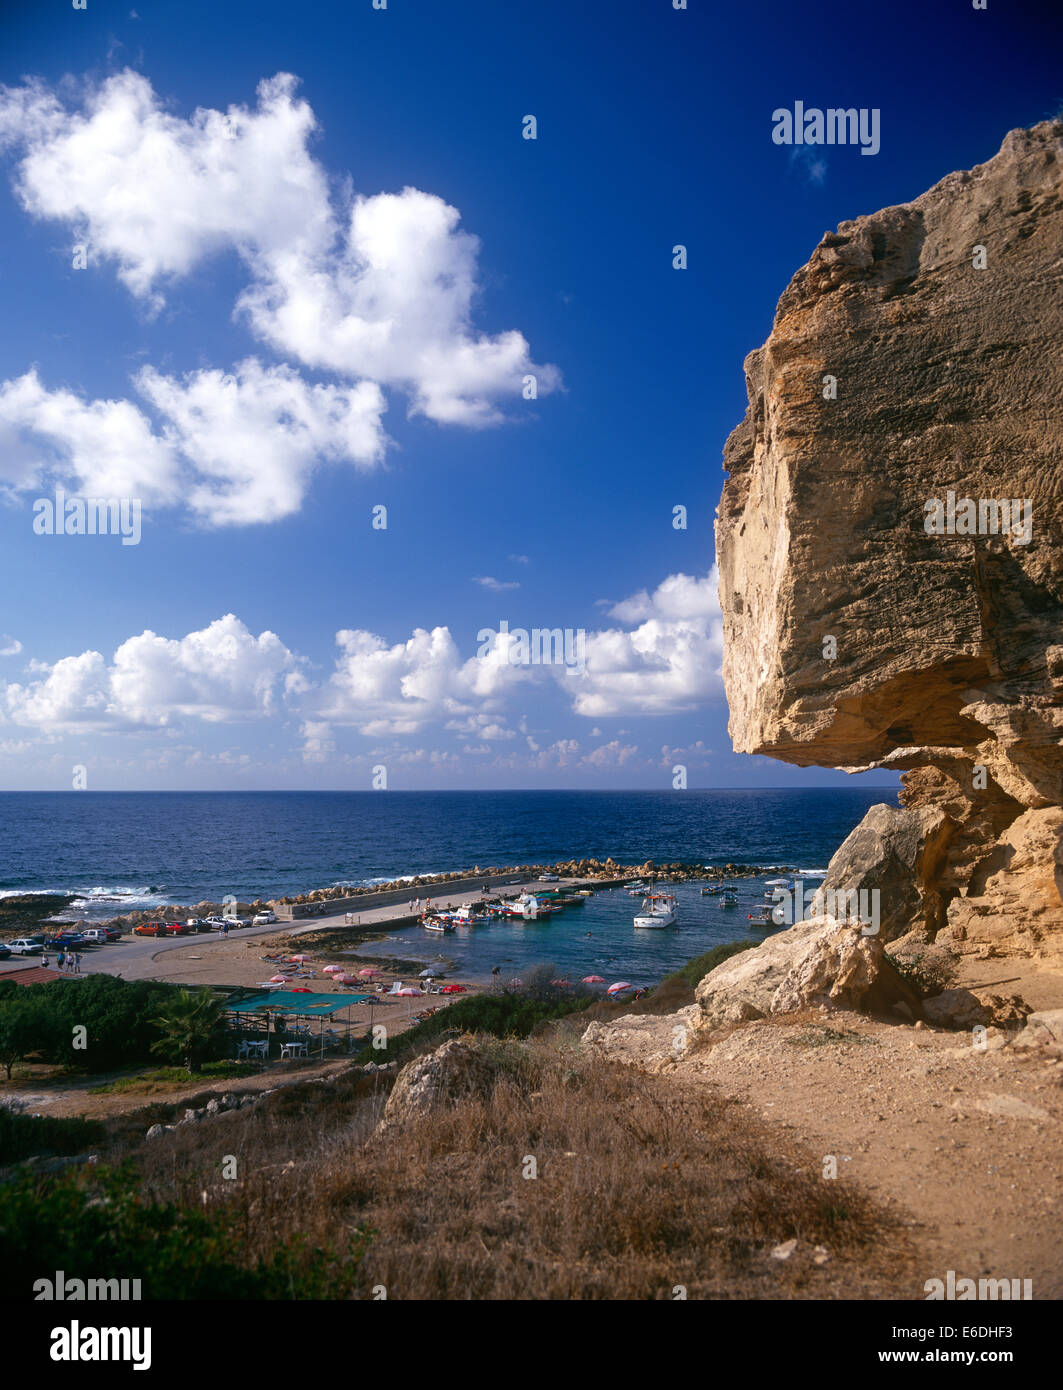 Fishing harbour in Cyprus Stock Photo